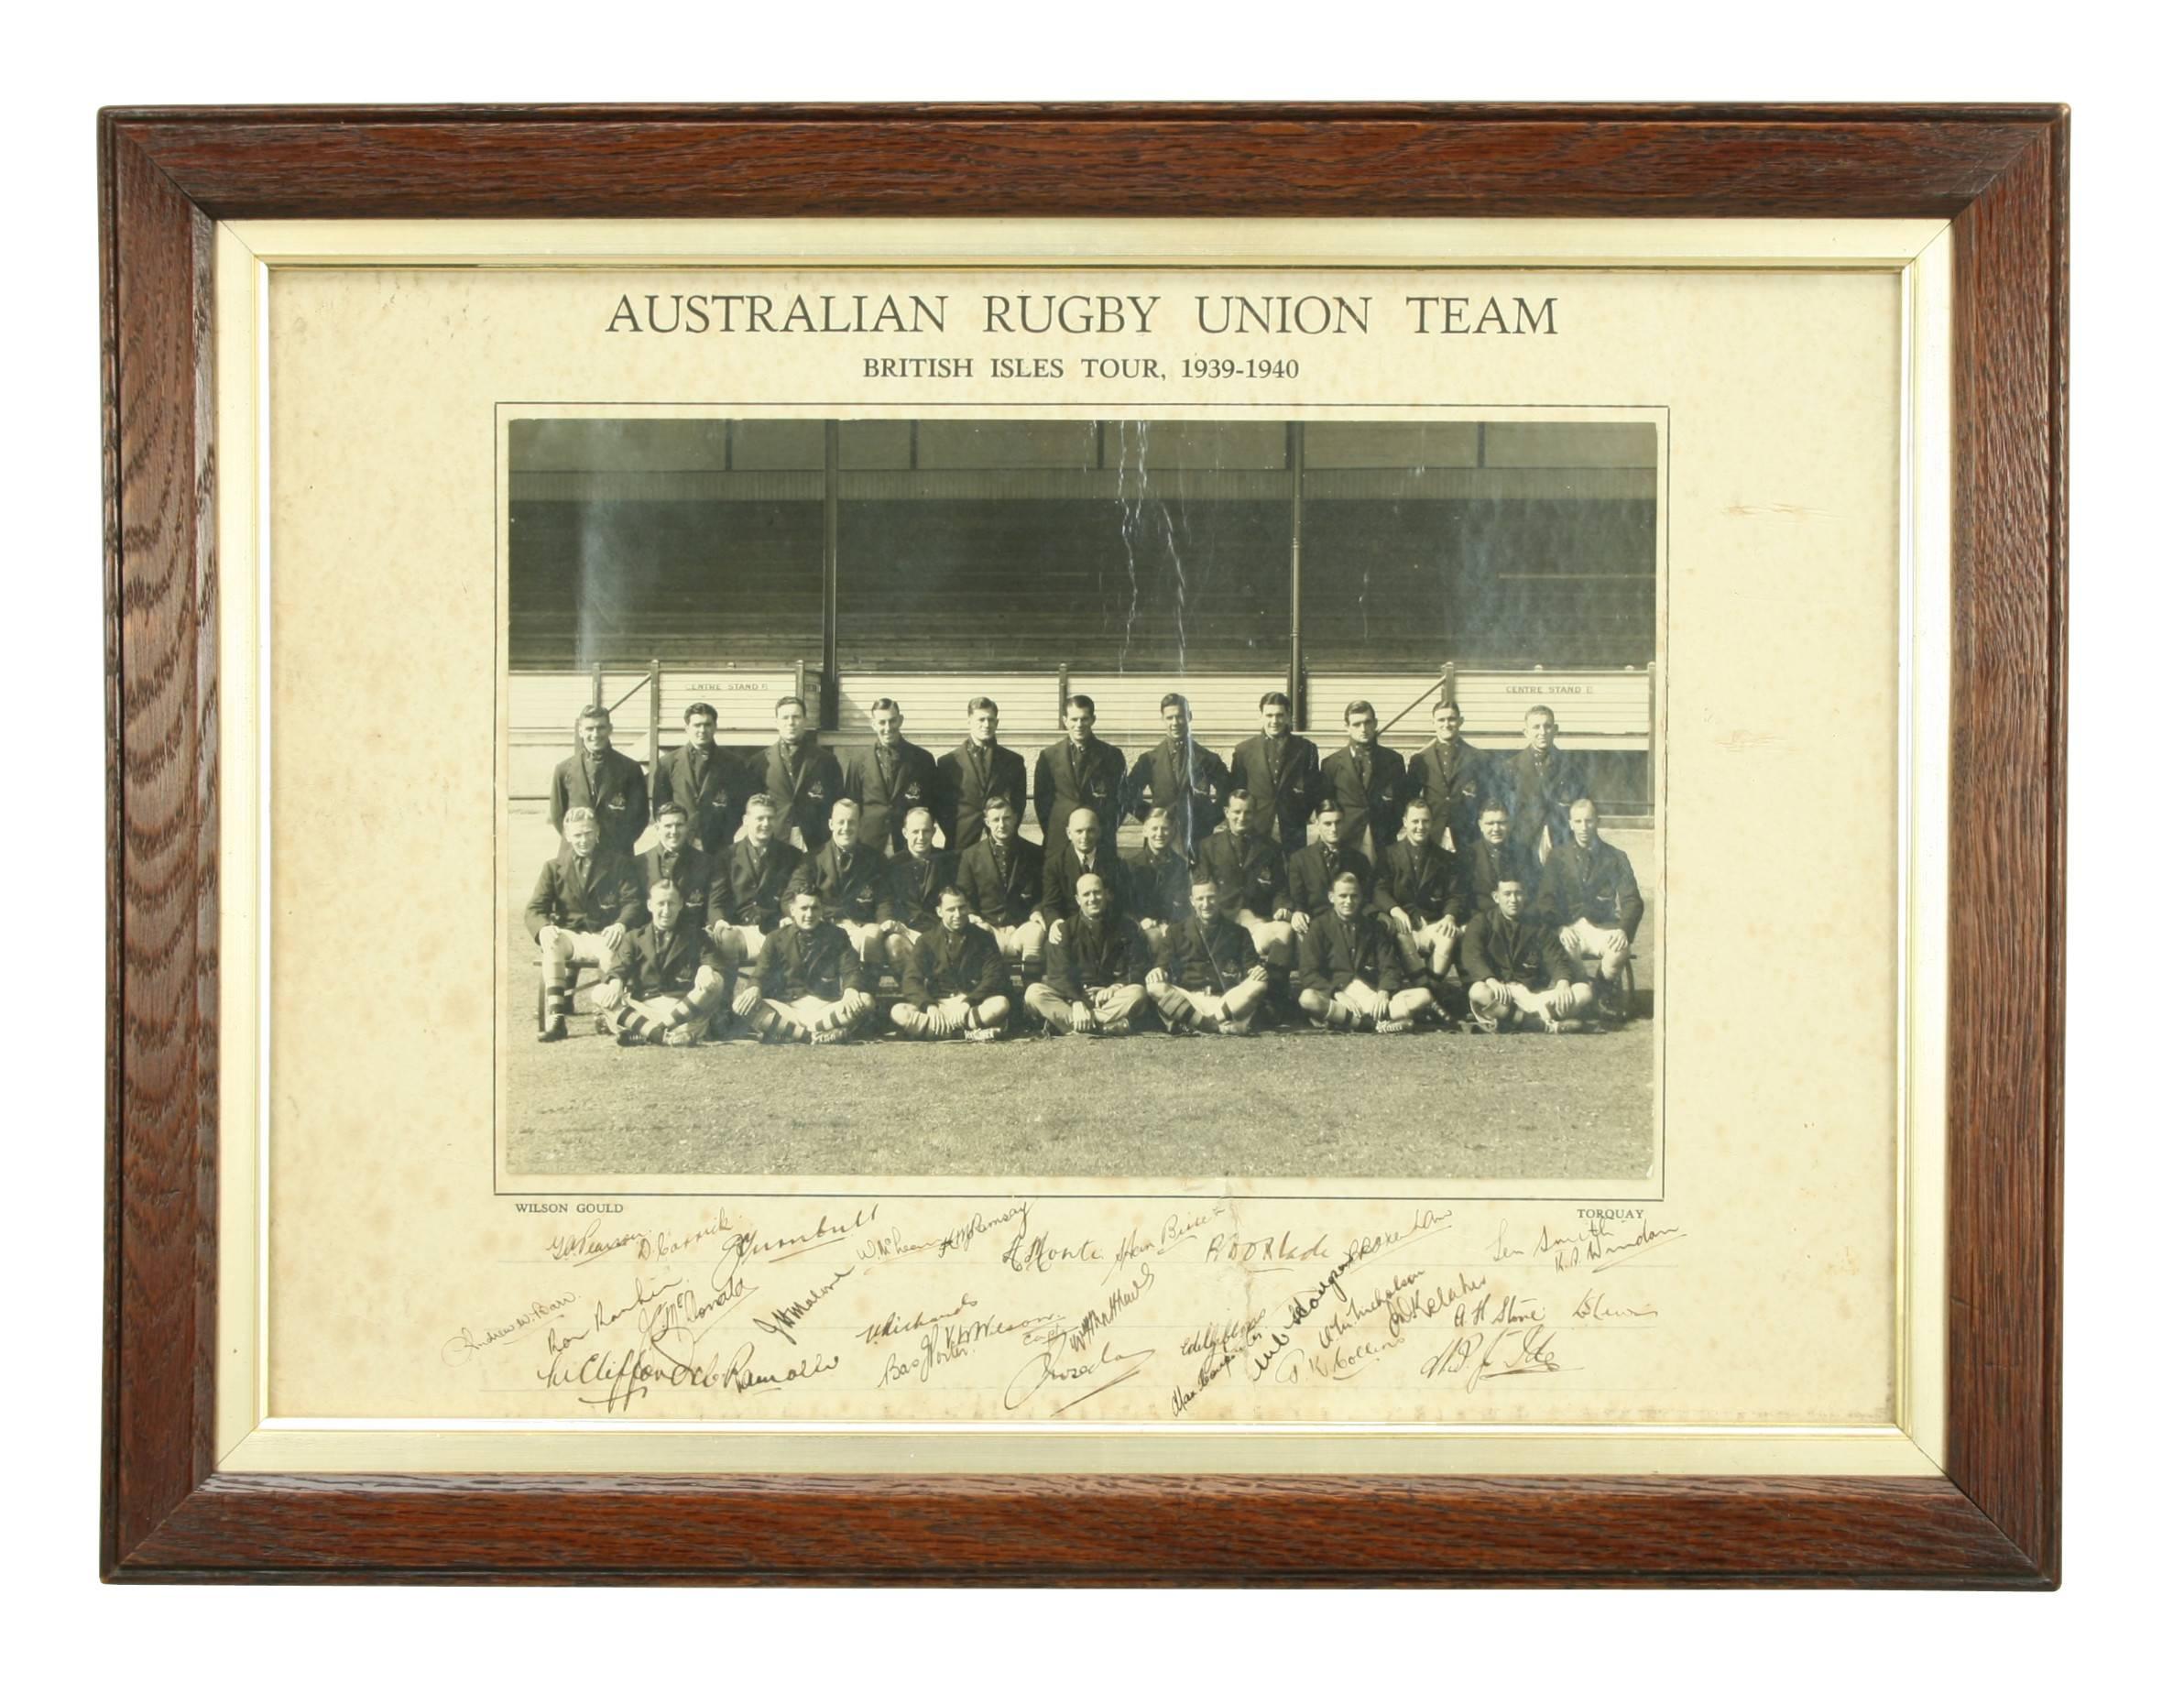 Signed Australian Rugby Union Team 1939 - 1940 British Isles Tour. 
A good framed original Australian Rugby Union Team photo of the 1939 - 1940 British Isles tour team. The Australian national rugby union team is nicknamed the Wallabies and this